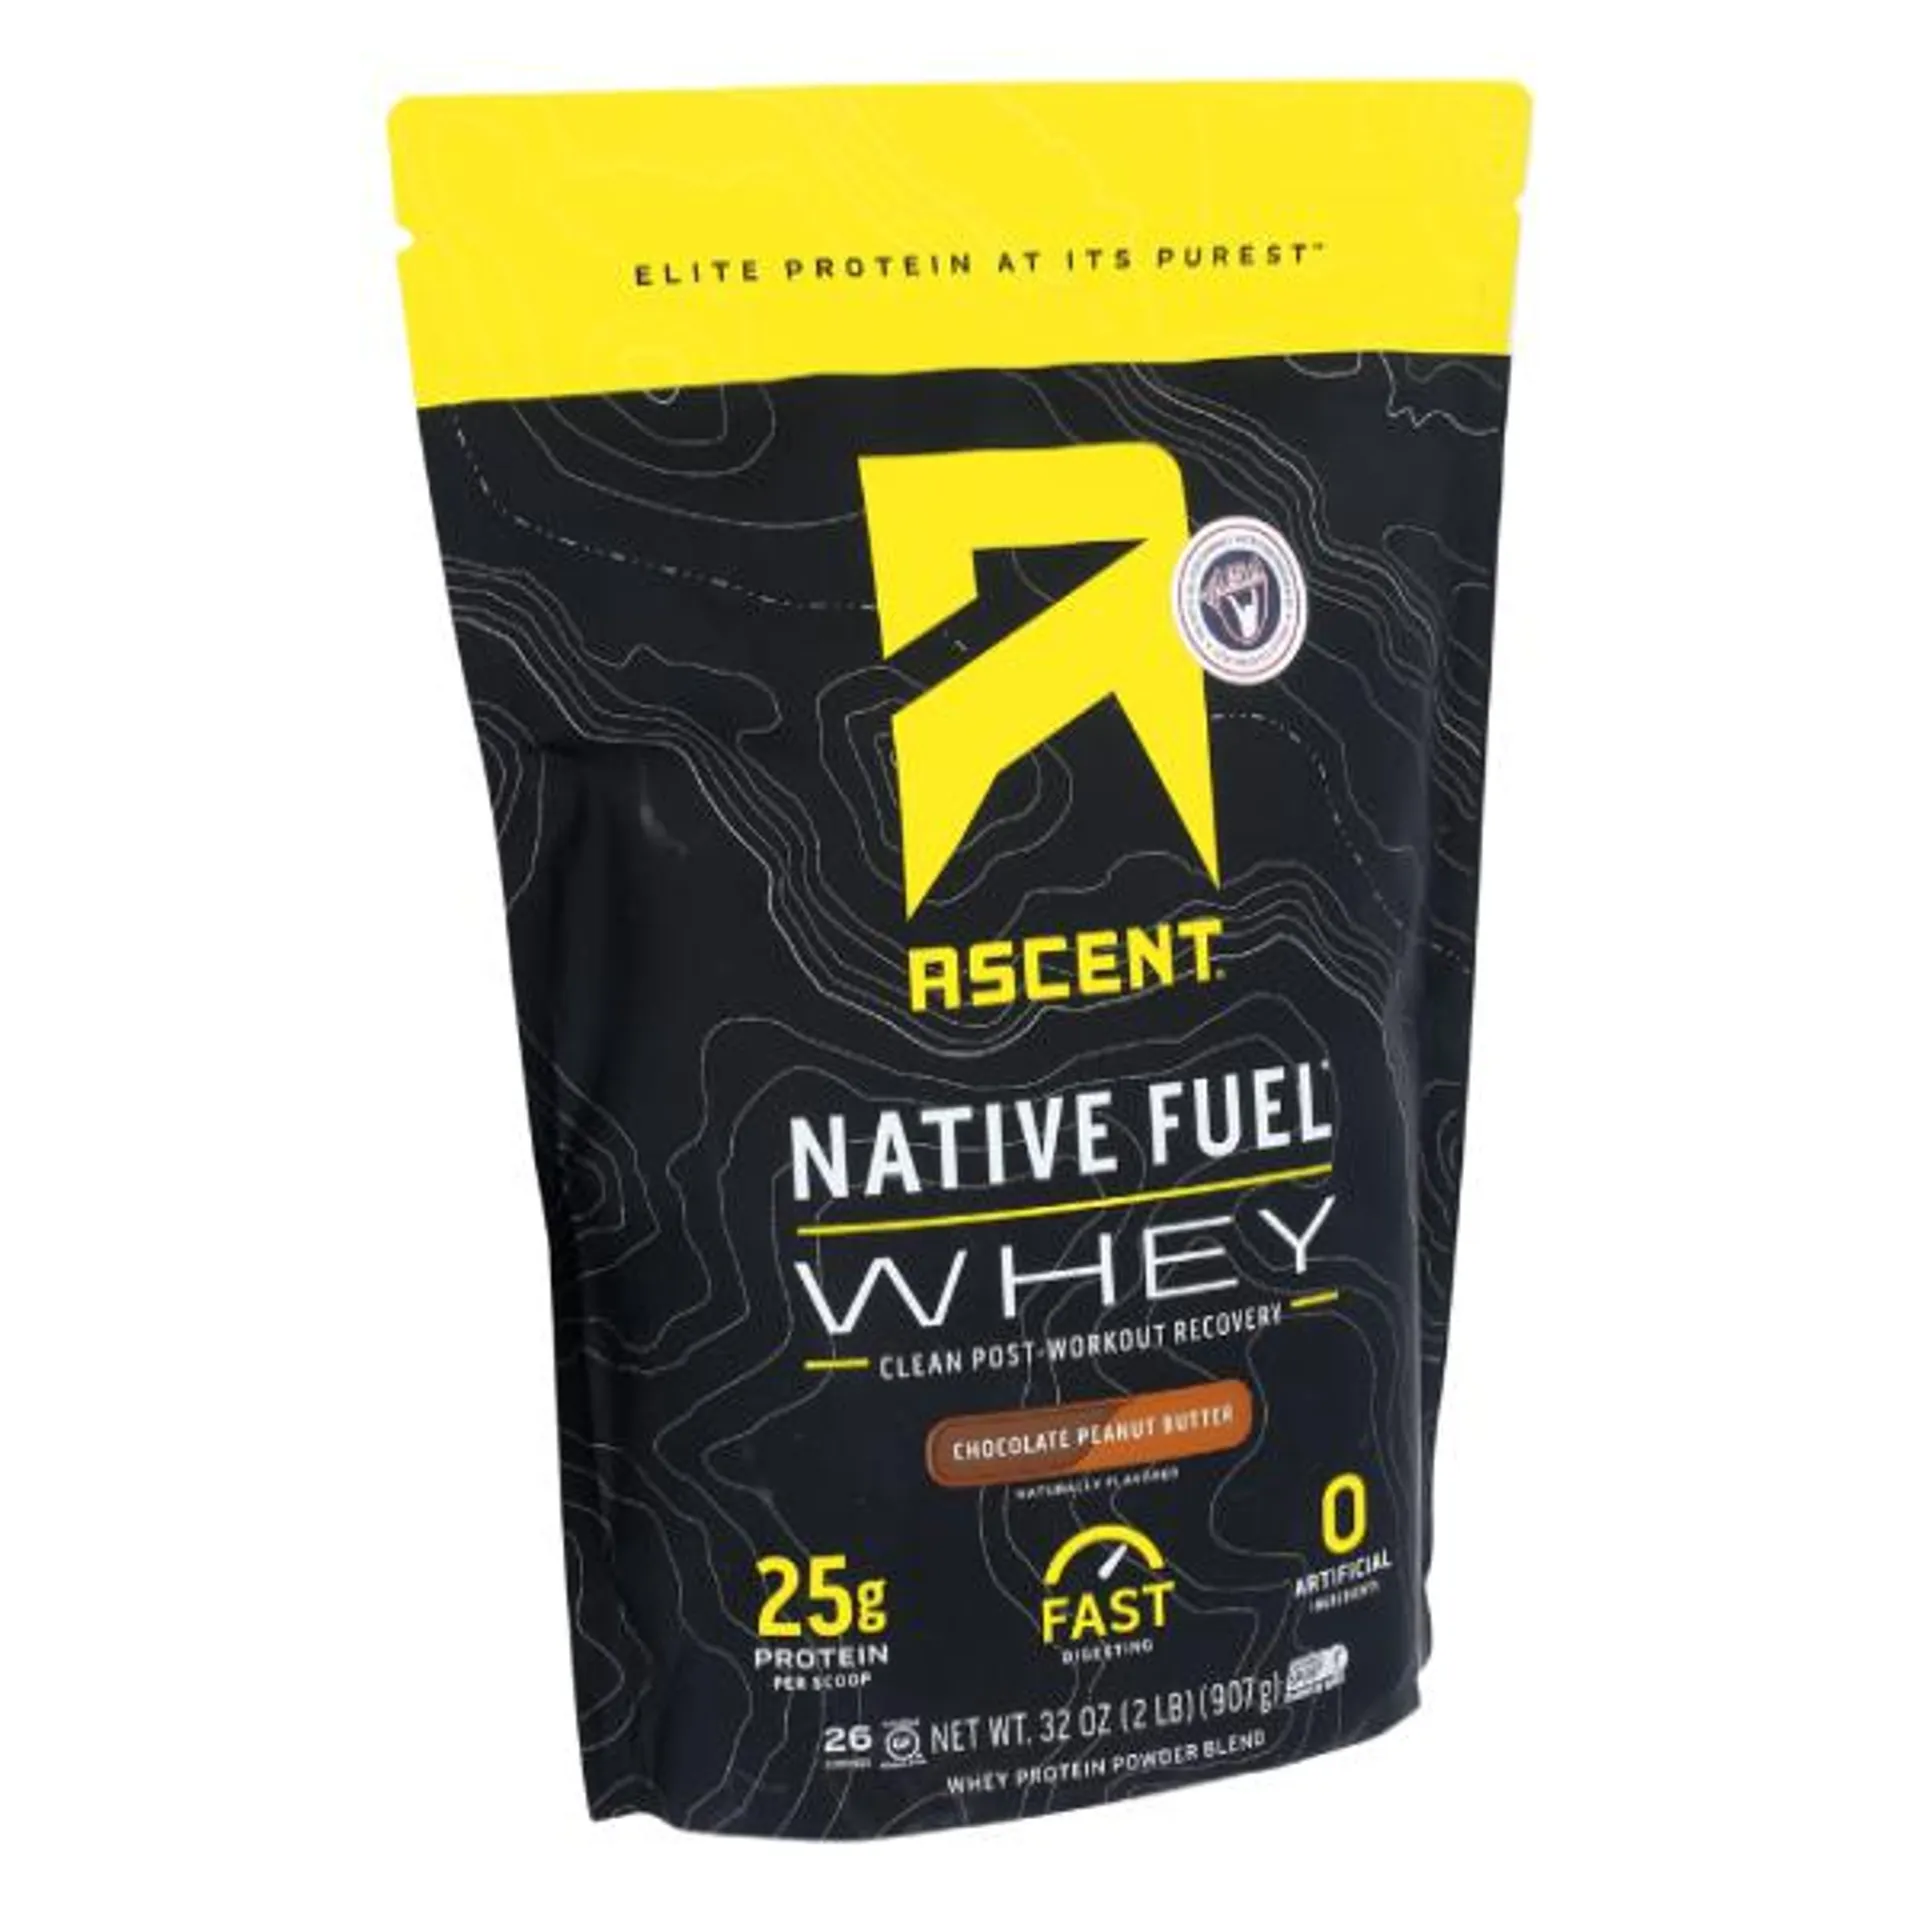 Ascent Native Fuel Whey Protein Chocolate Peanut Butter - 2 Pound